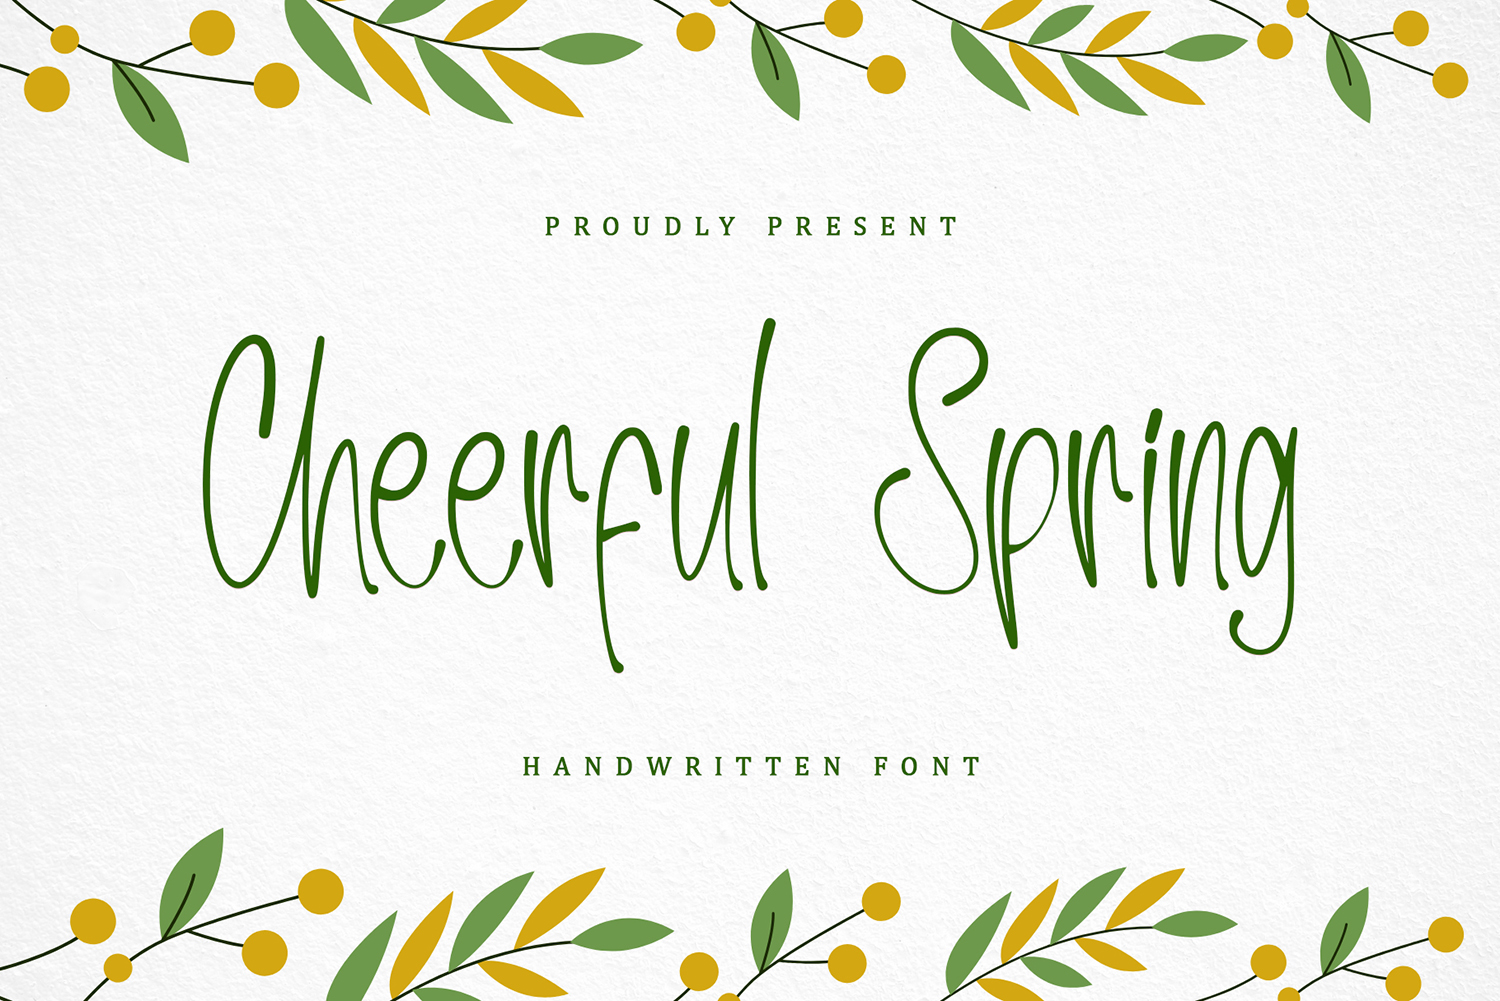 Cheerful Spring Free Font